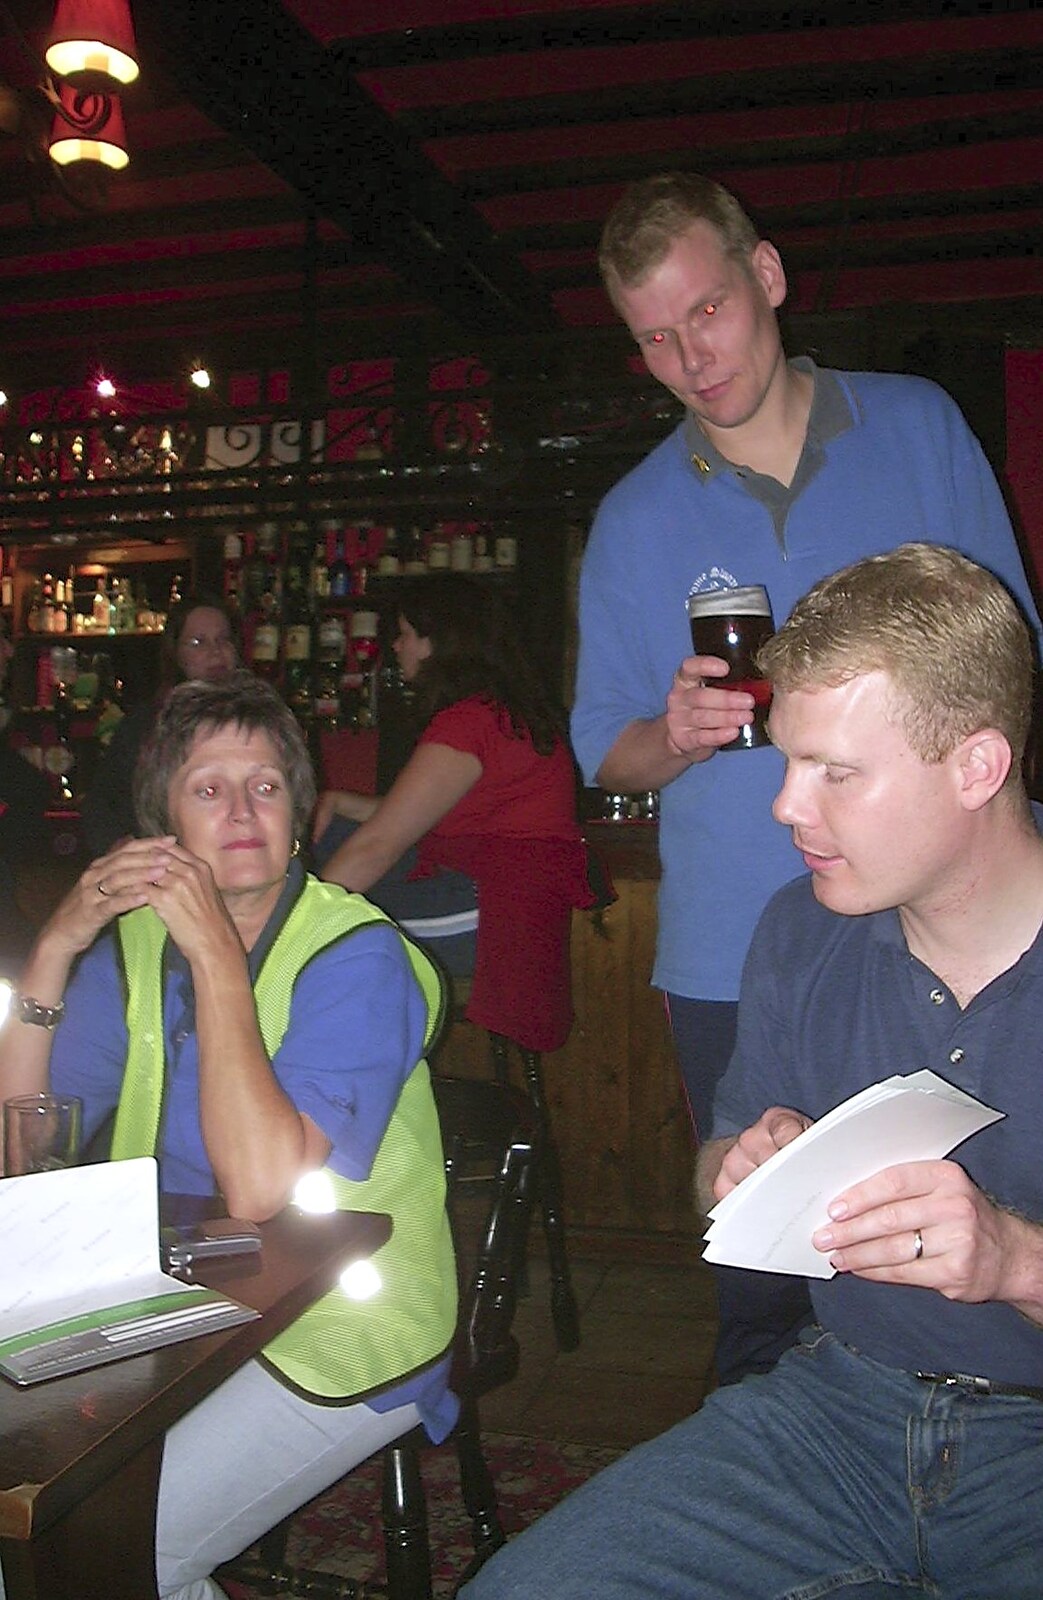 BSCC Bike Rides and Ten-Pin Bowling, Thornham and Norwich - 18th September 2004: Photos are passed around